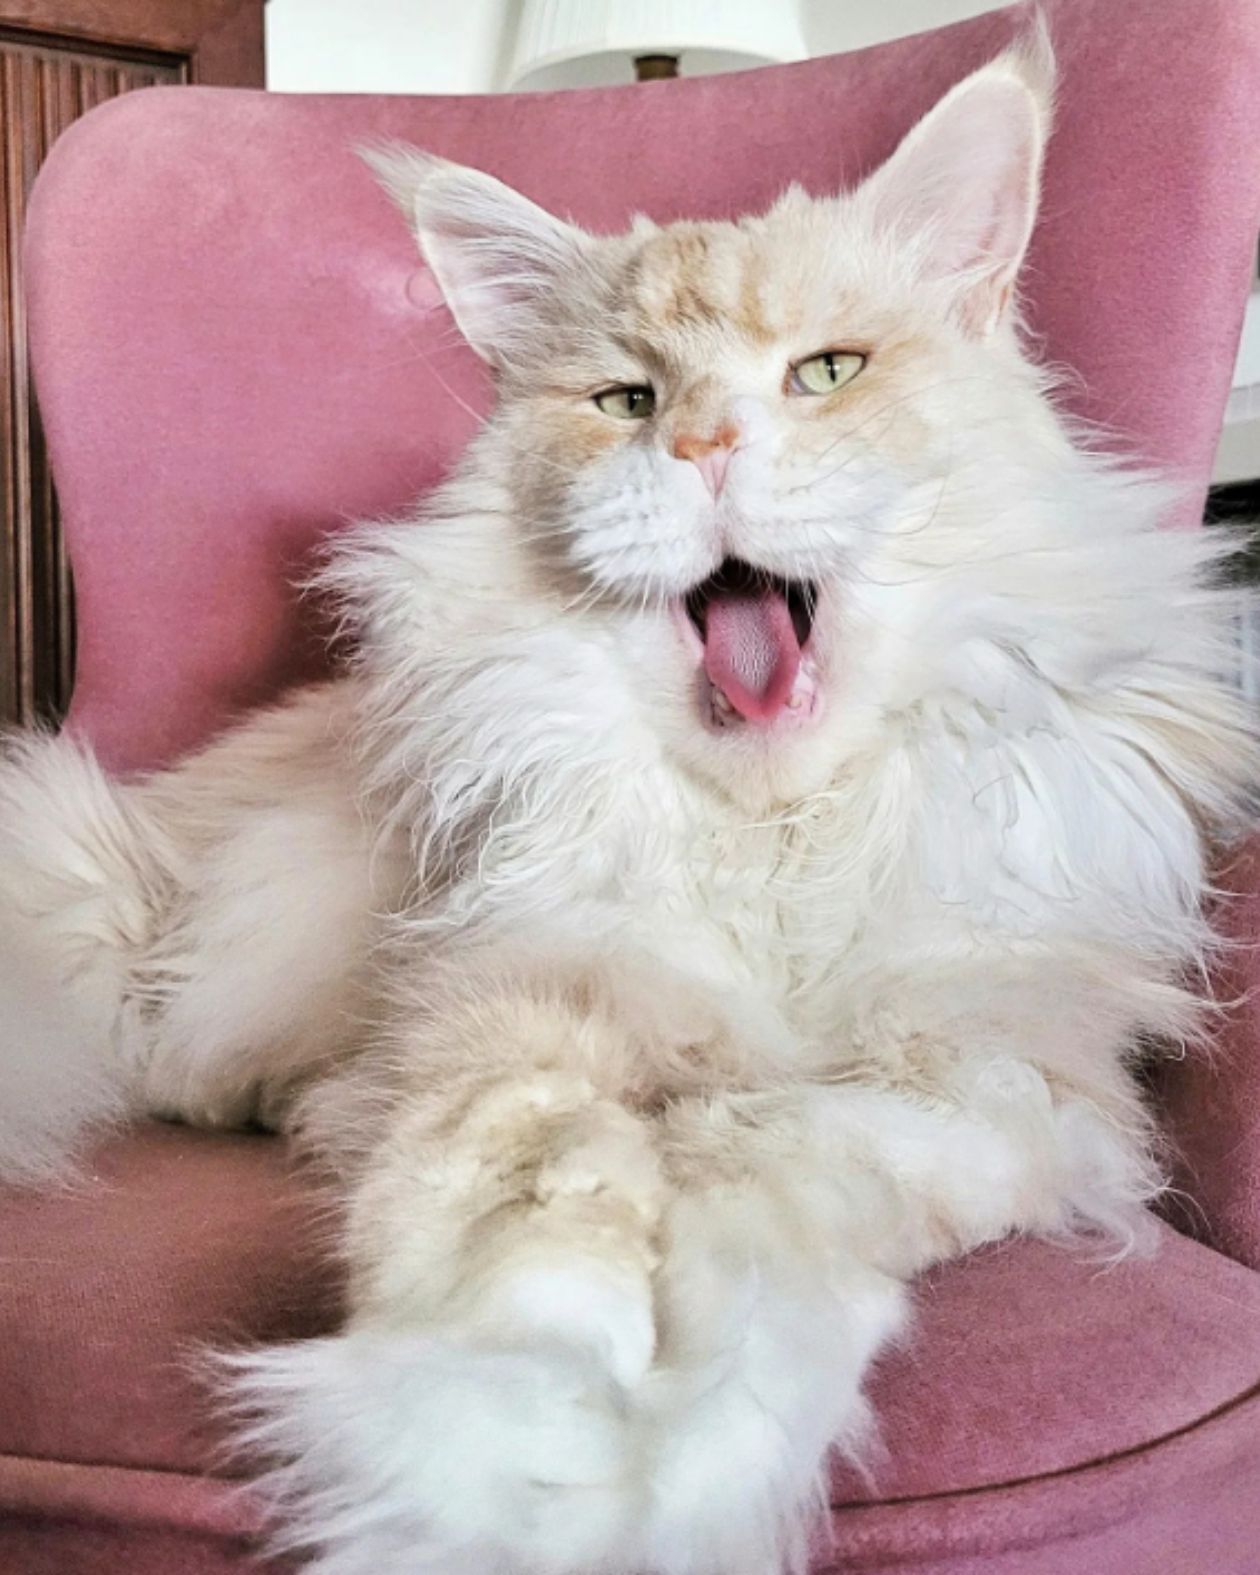 cat yawning on a pink sofa